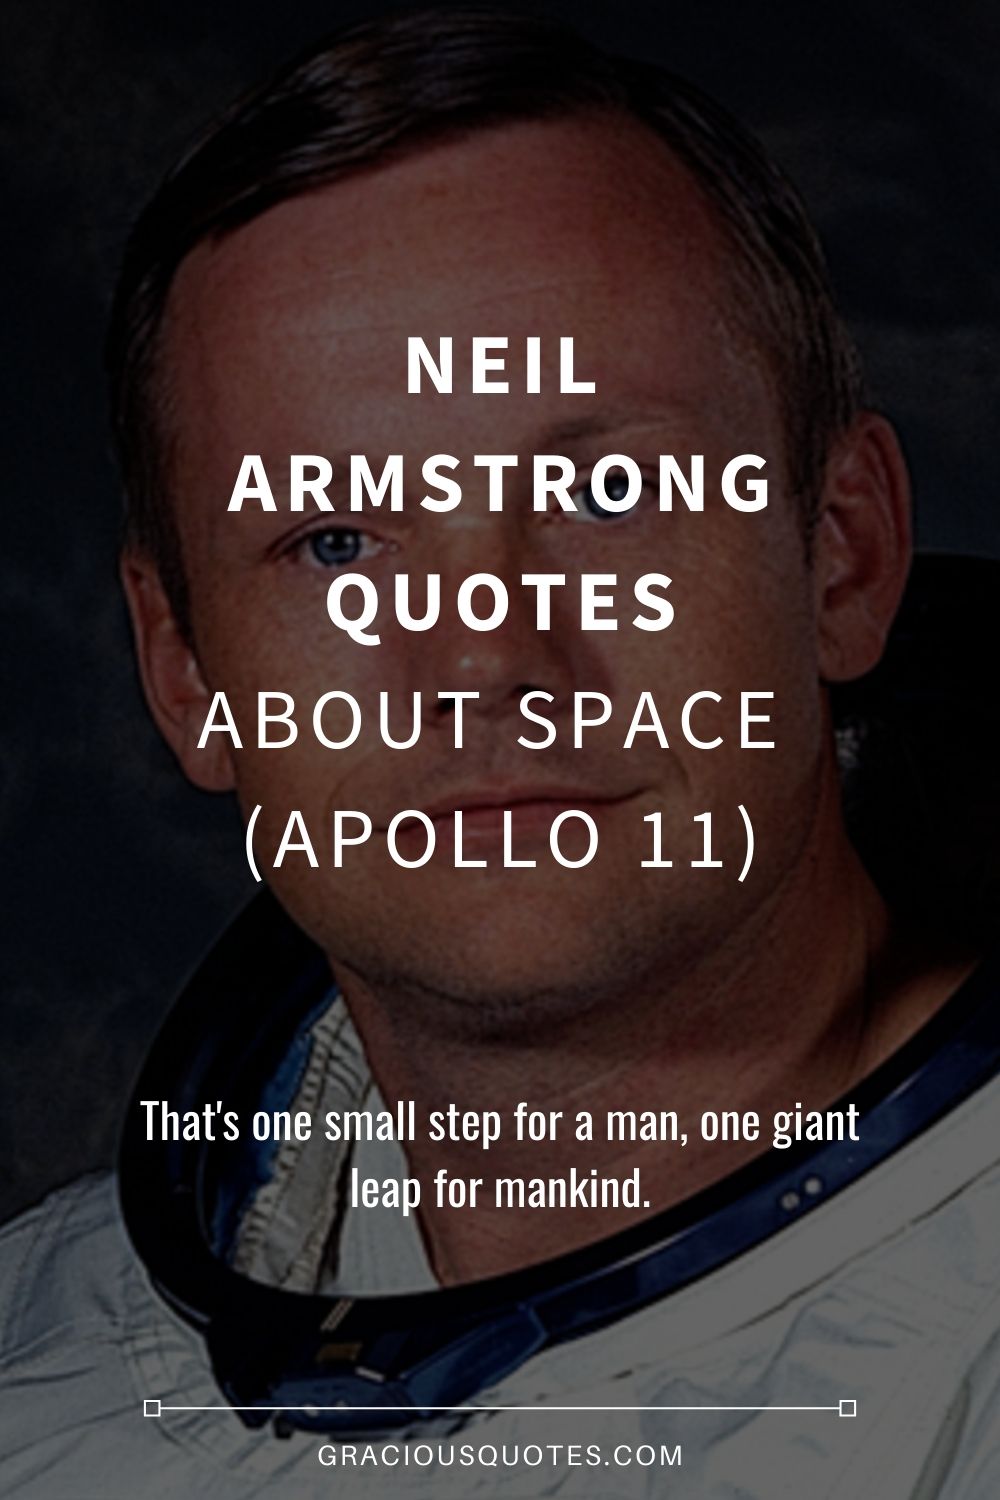 Neil Armstrong Quotes About Space (APOLLO 11) - Gracious Quotes